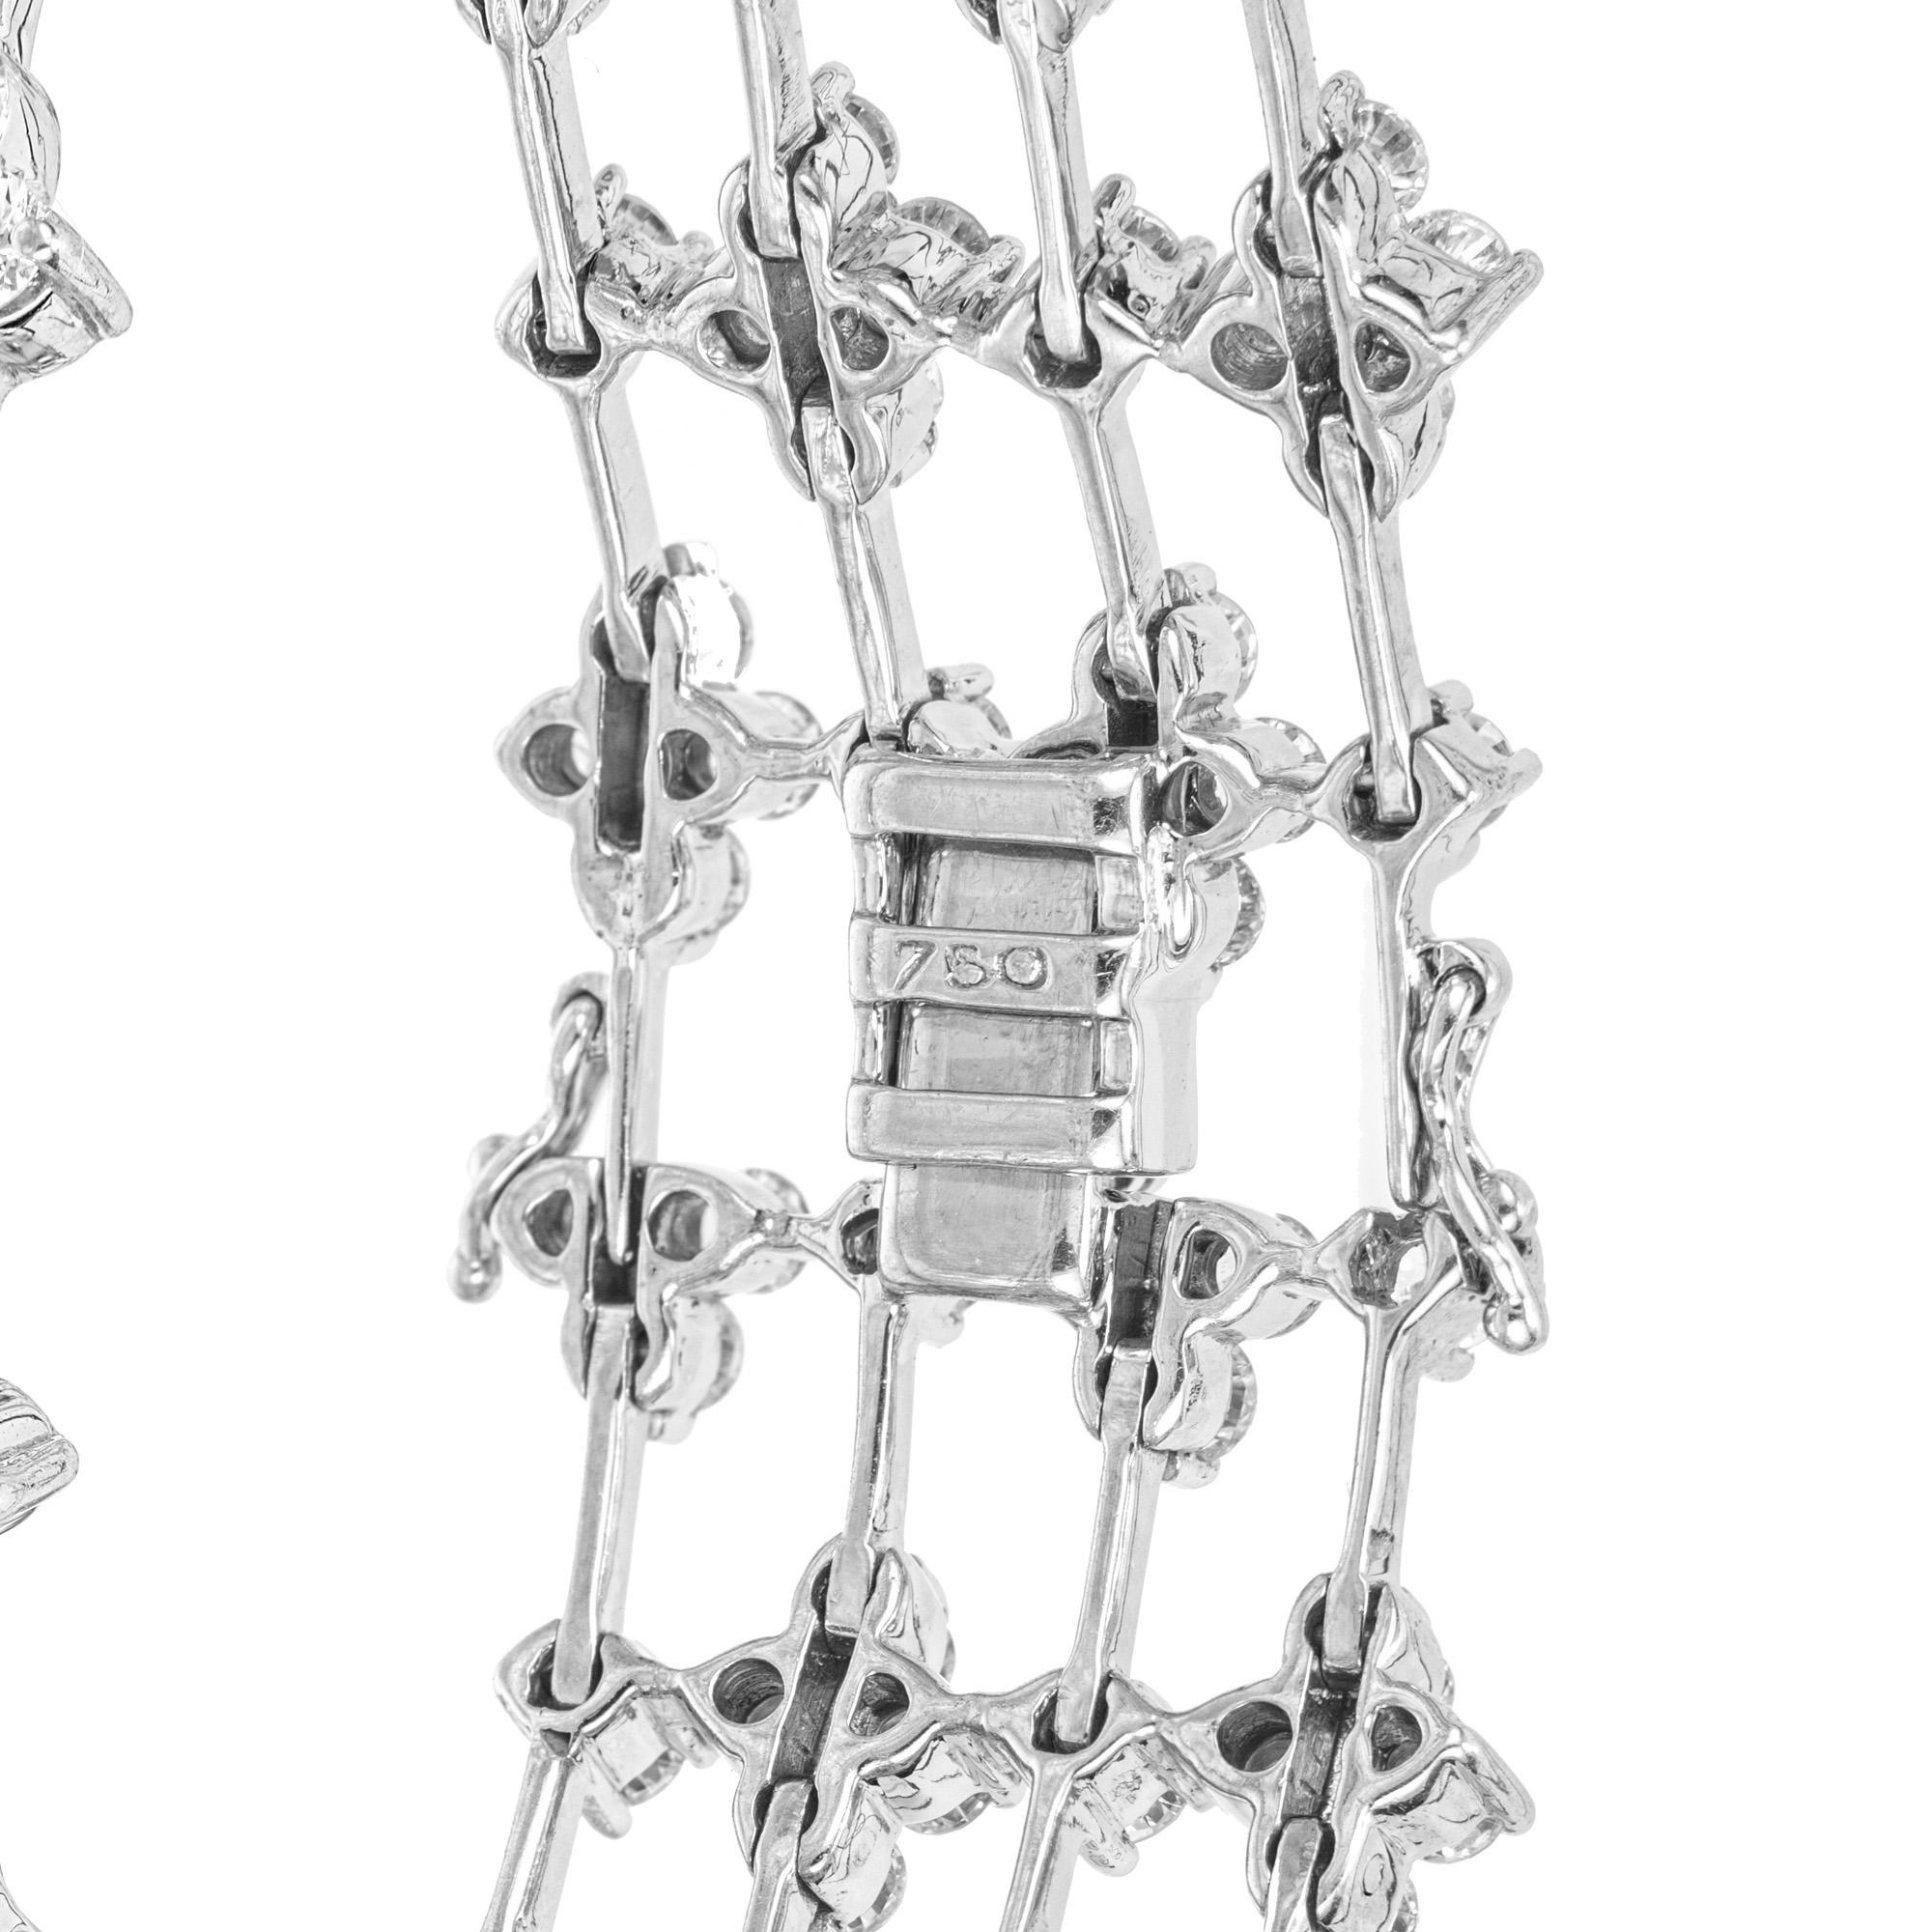 10.00 Carat Round Diamond White Gold Wide Artistic Design Multi-Row Bracelet In Good Condition For Sale In Stamford, CT